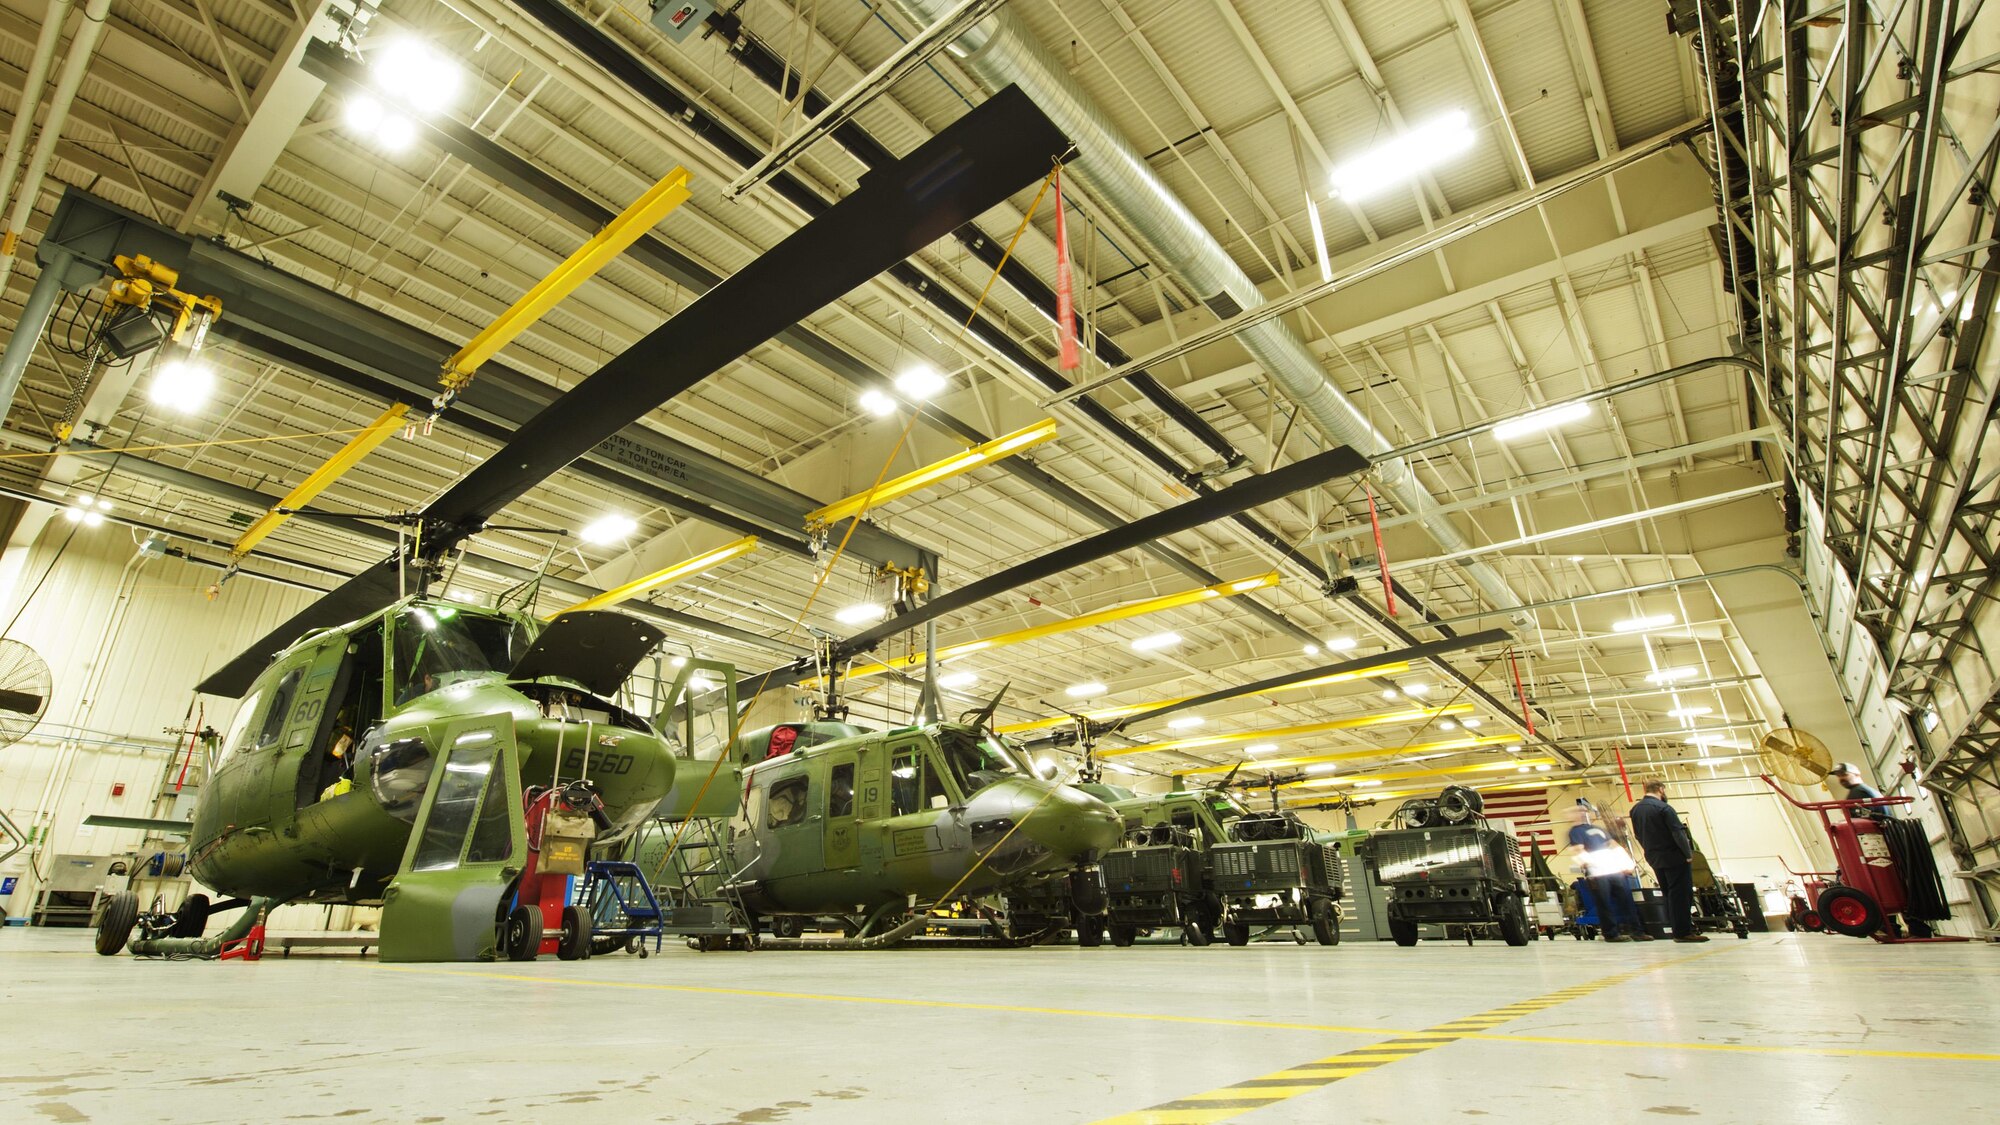 UH-1N Iroquois line the 54th Helicopter Squadron maintenance hangar at Minot Air Force Base, N.D., Jan. 18, 2017. Maintenance on 54th Helicopter Squadron’s fleet is critical, in order to provide support to 91st Missile Wing Airmen and assets in the missile complex. (U.S. Air Force photo/Airman 1st Class J.T. Armstrong)